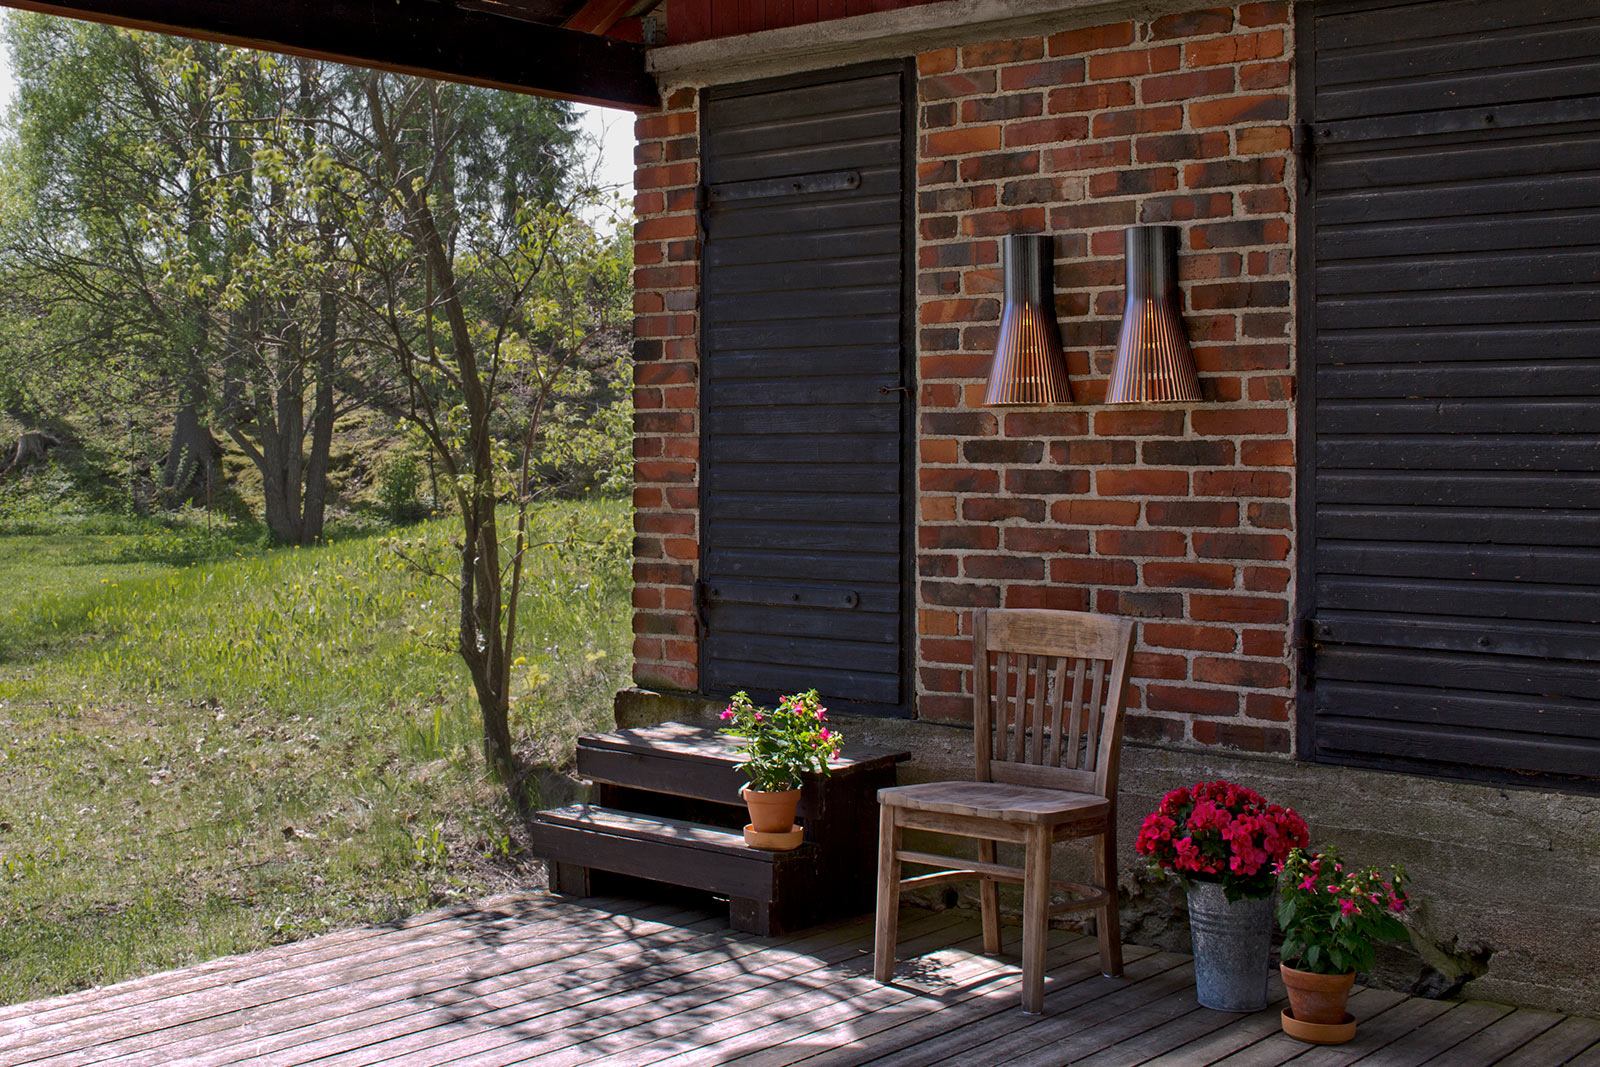 A covered patio with flowers and a chair in front of a brick wall. Two Secto Small wall lamps between black doors.